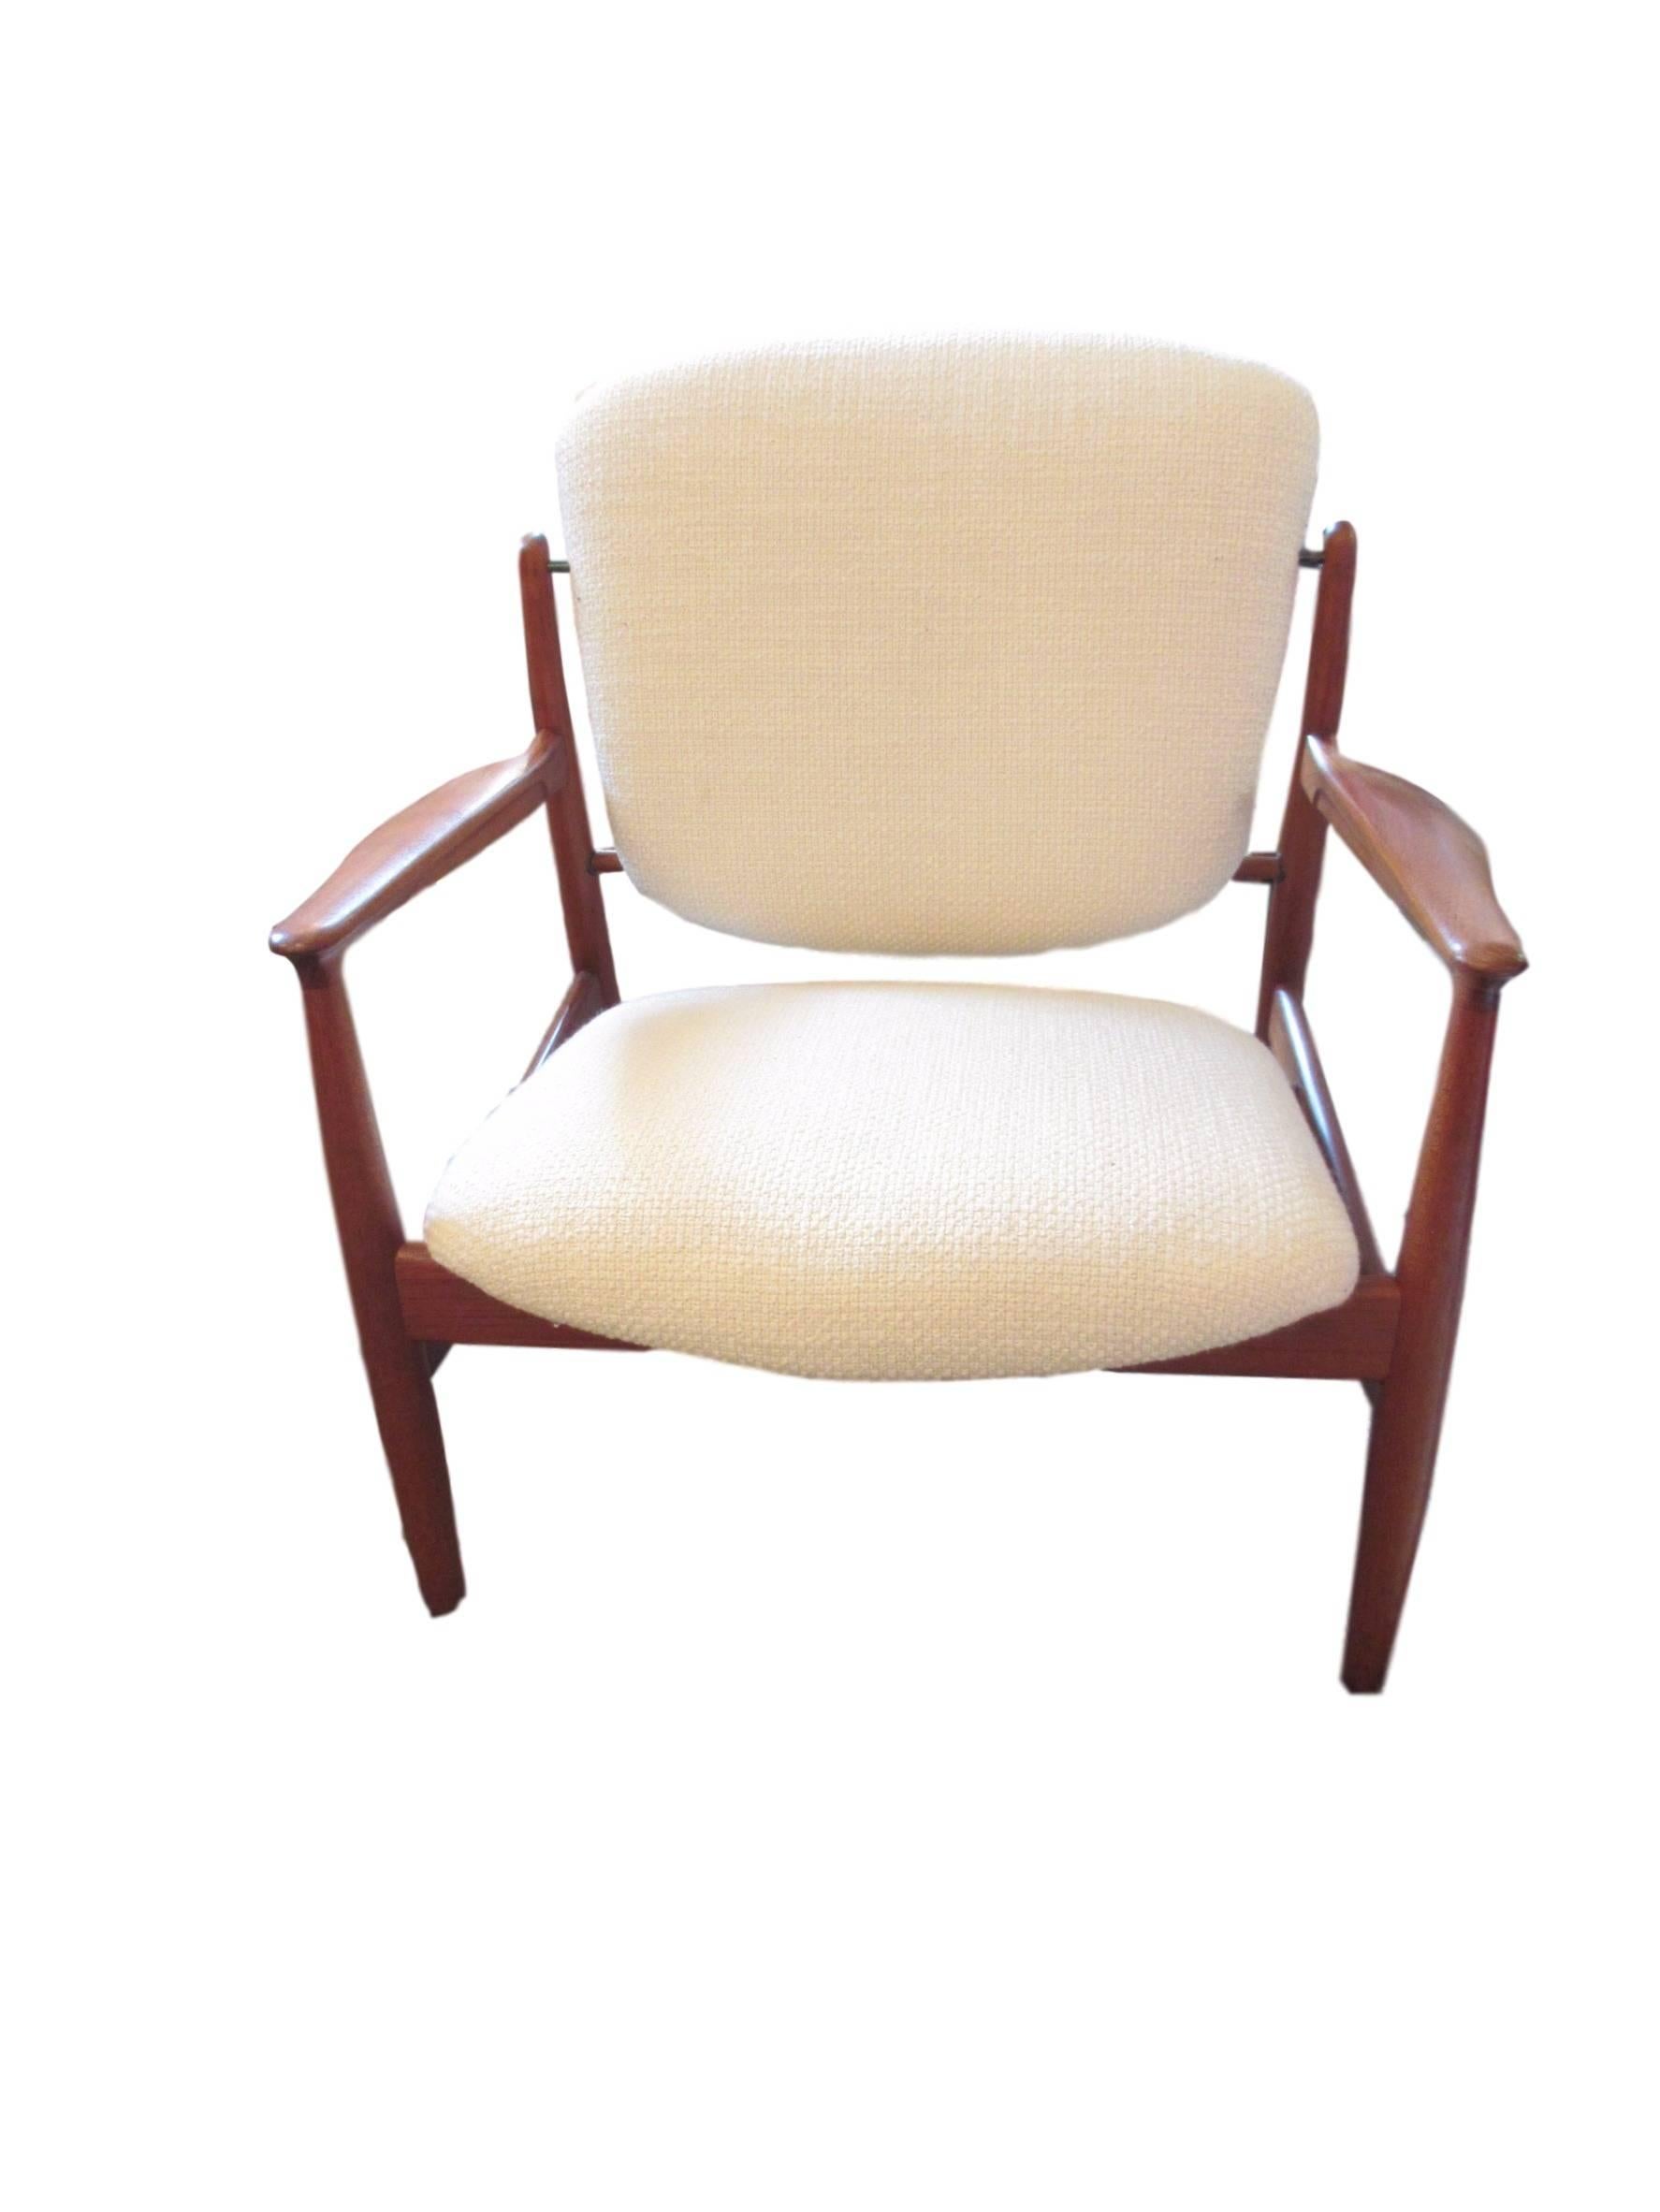 Set of two easy FD 136 chairs by Finn Juhl, Denmark, circa 1950
The off-white fabric is in very good state.